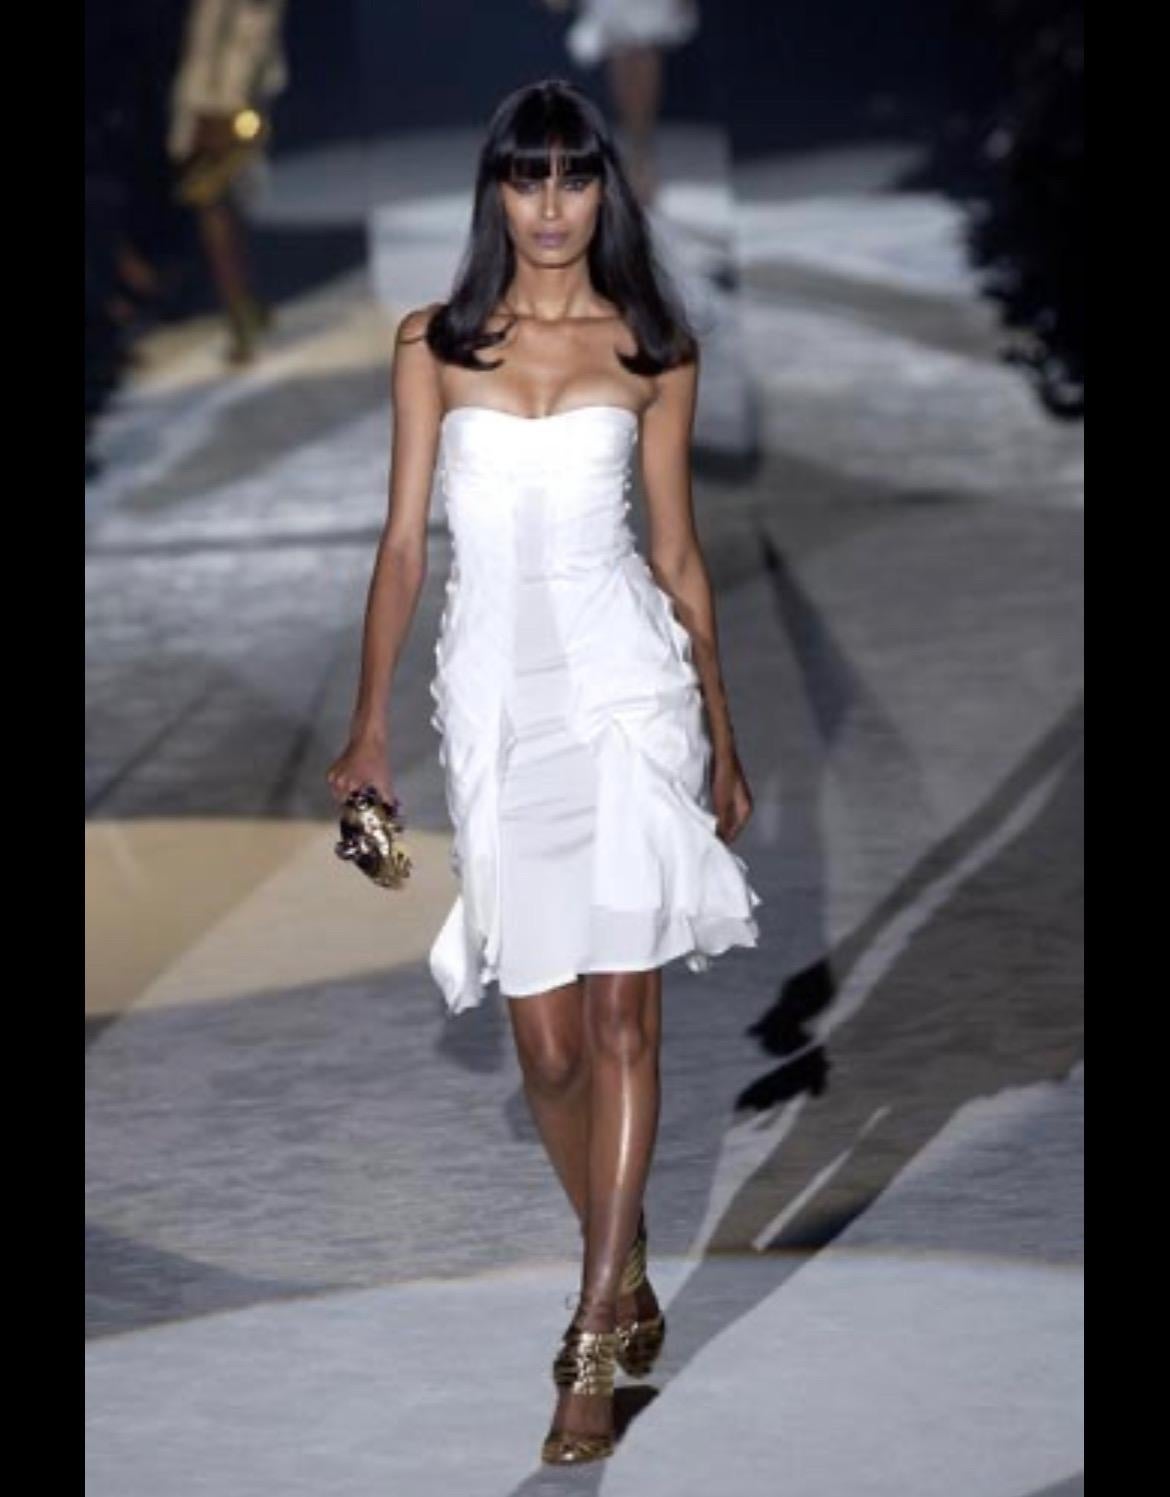 Presenting a fabulous black strapless Gucci dress, designed by Tom ford. From the Spring/Summer 2004 collection, this dress debuted in white on the season's runway as part of look 30 modeled by Ujjwala Raut. This incredible silk dress features